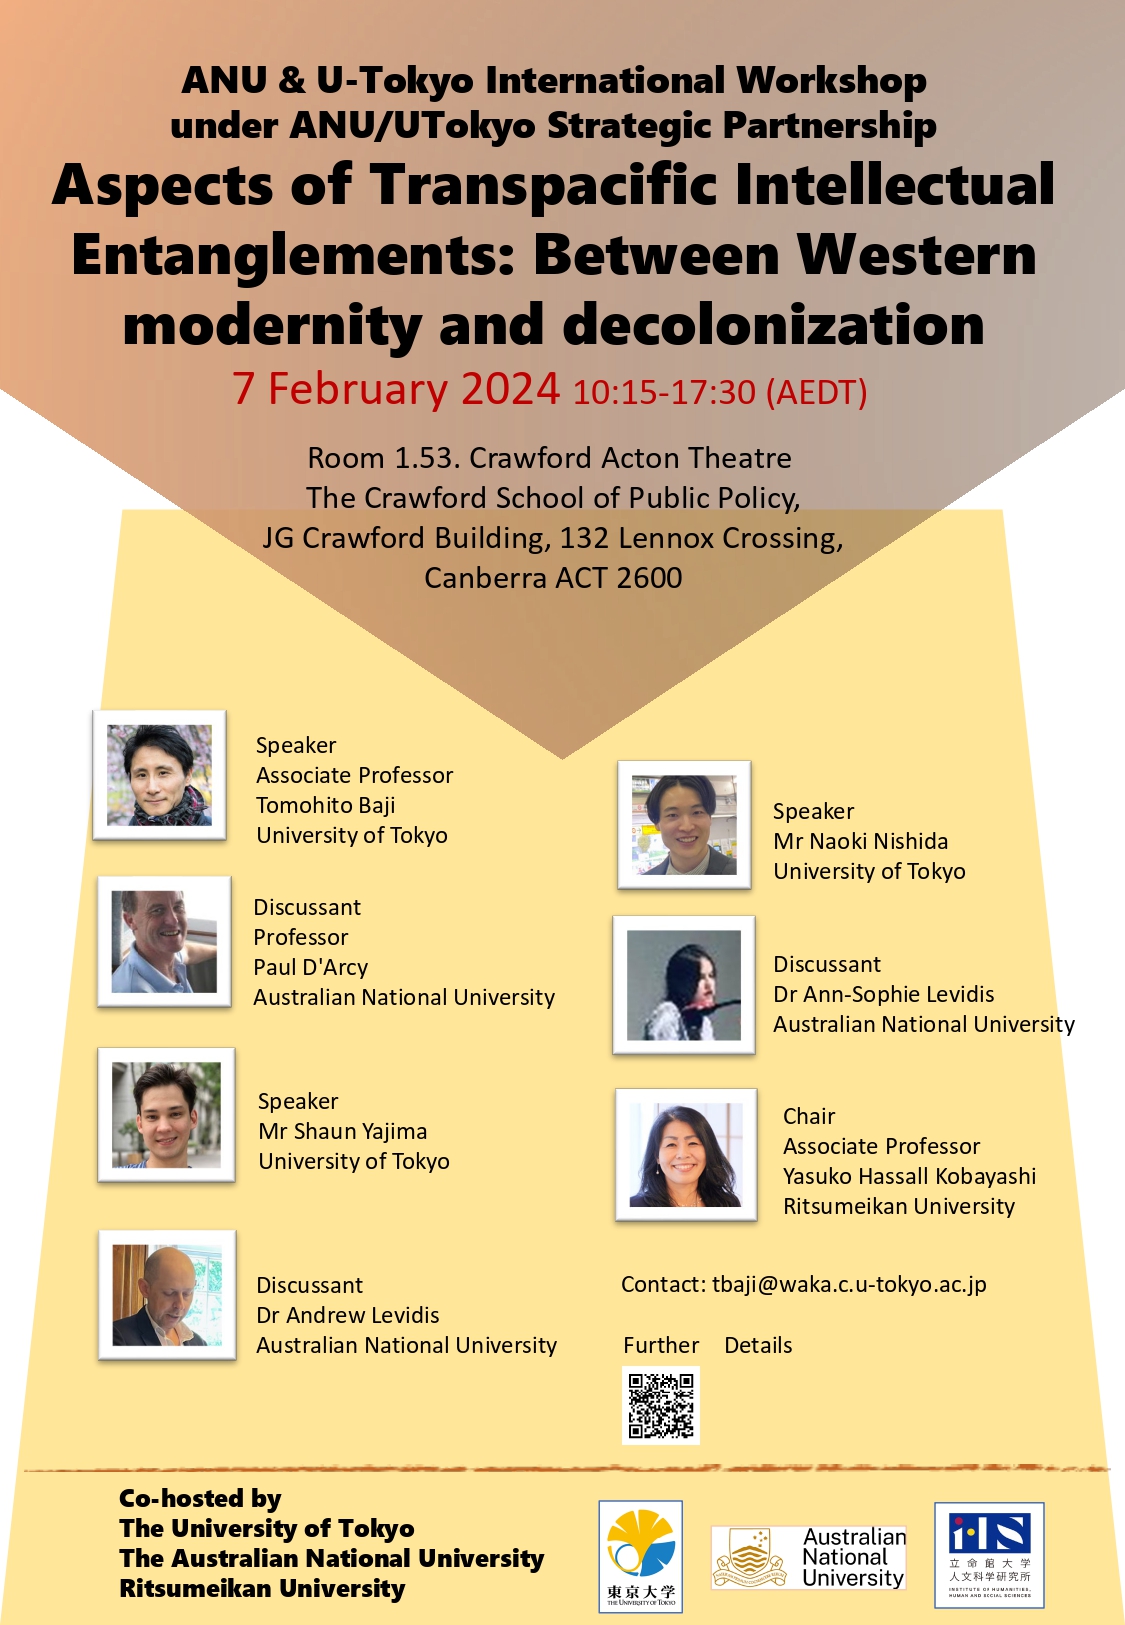 Aspects of Transpacific Intellectual Entanglements: Between Western modernity and decolonization